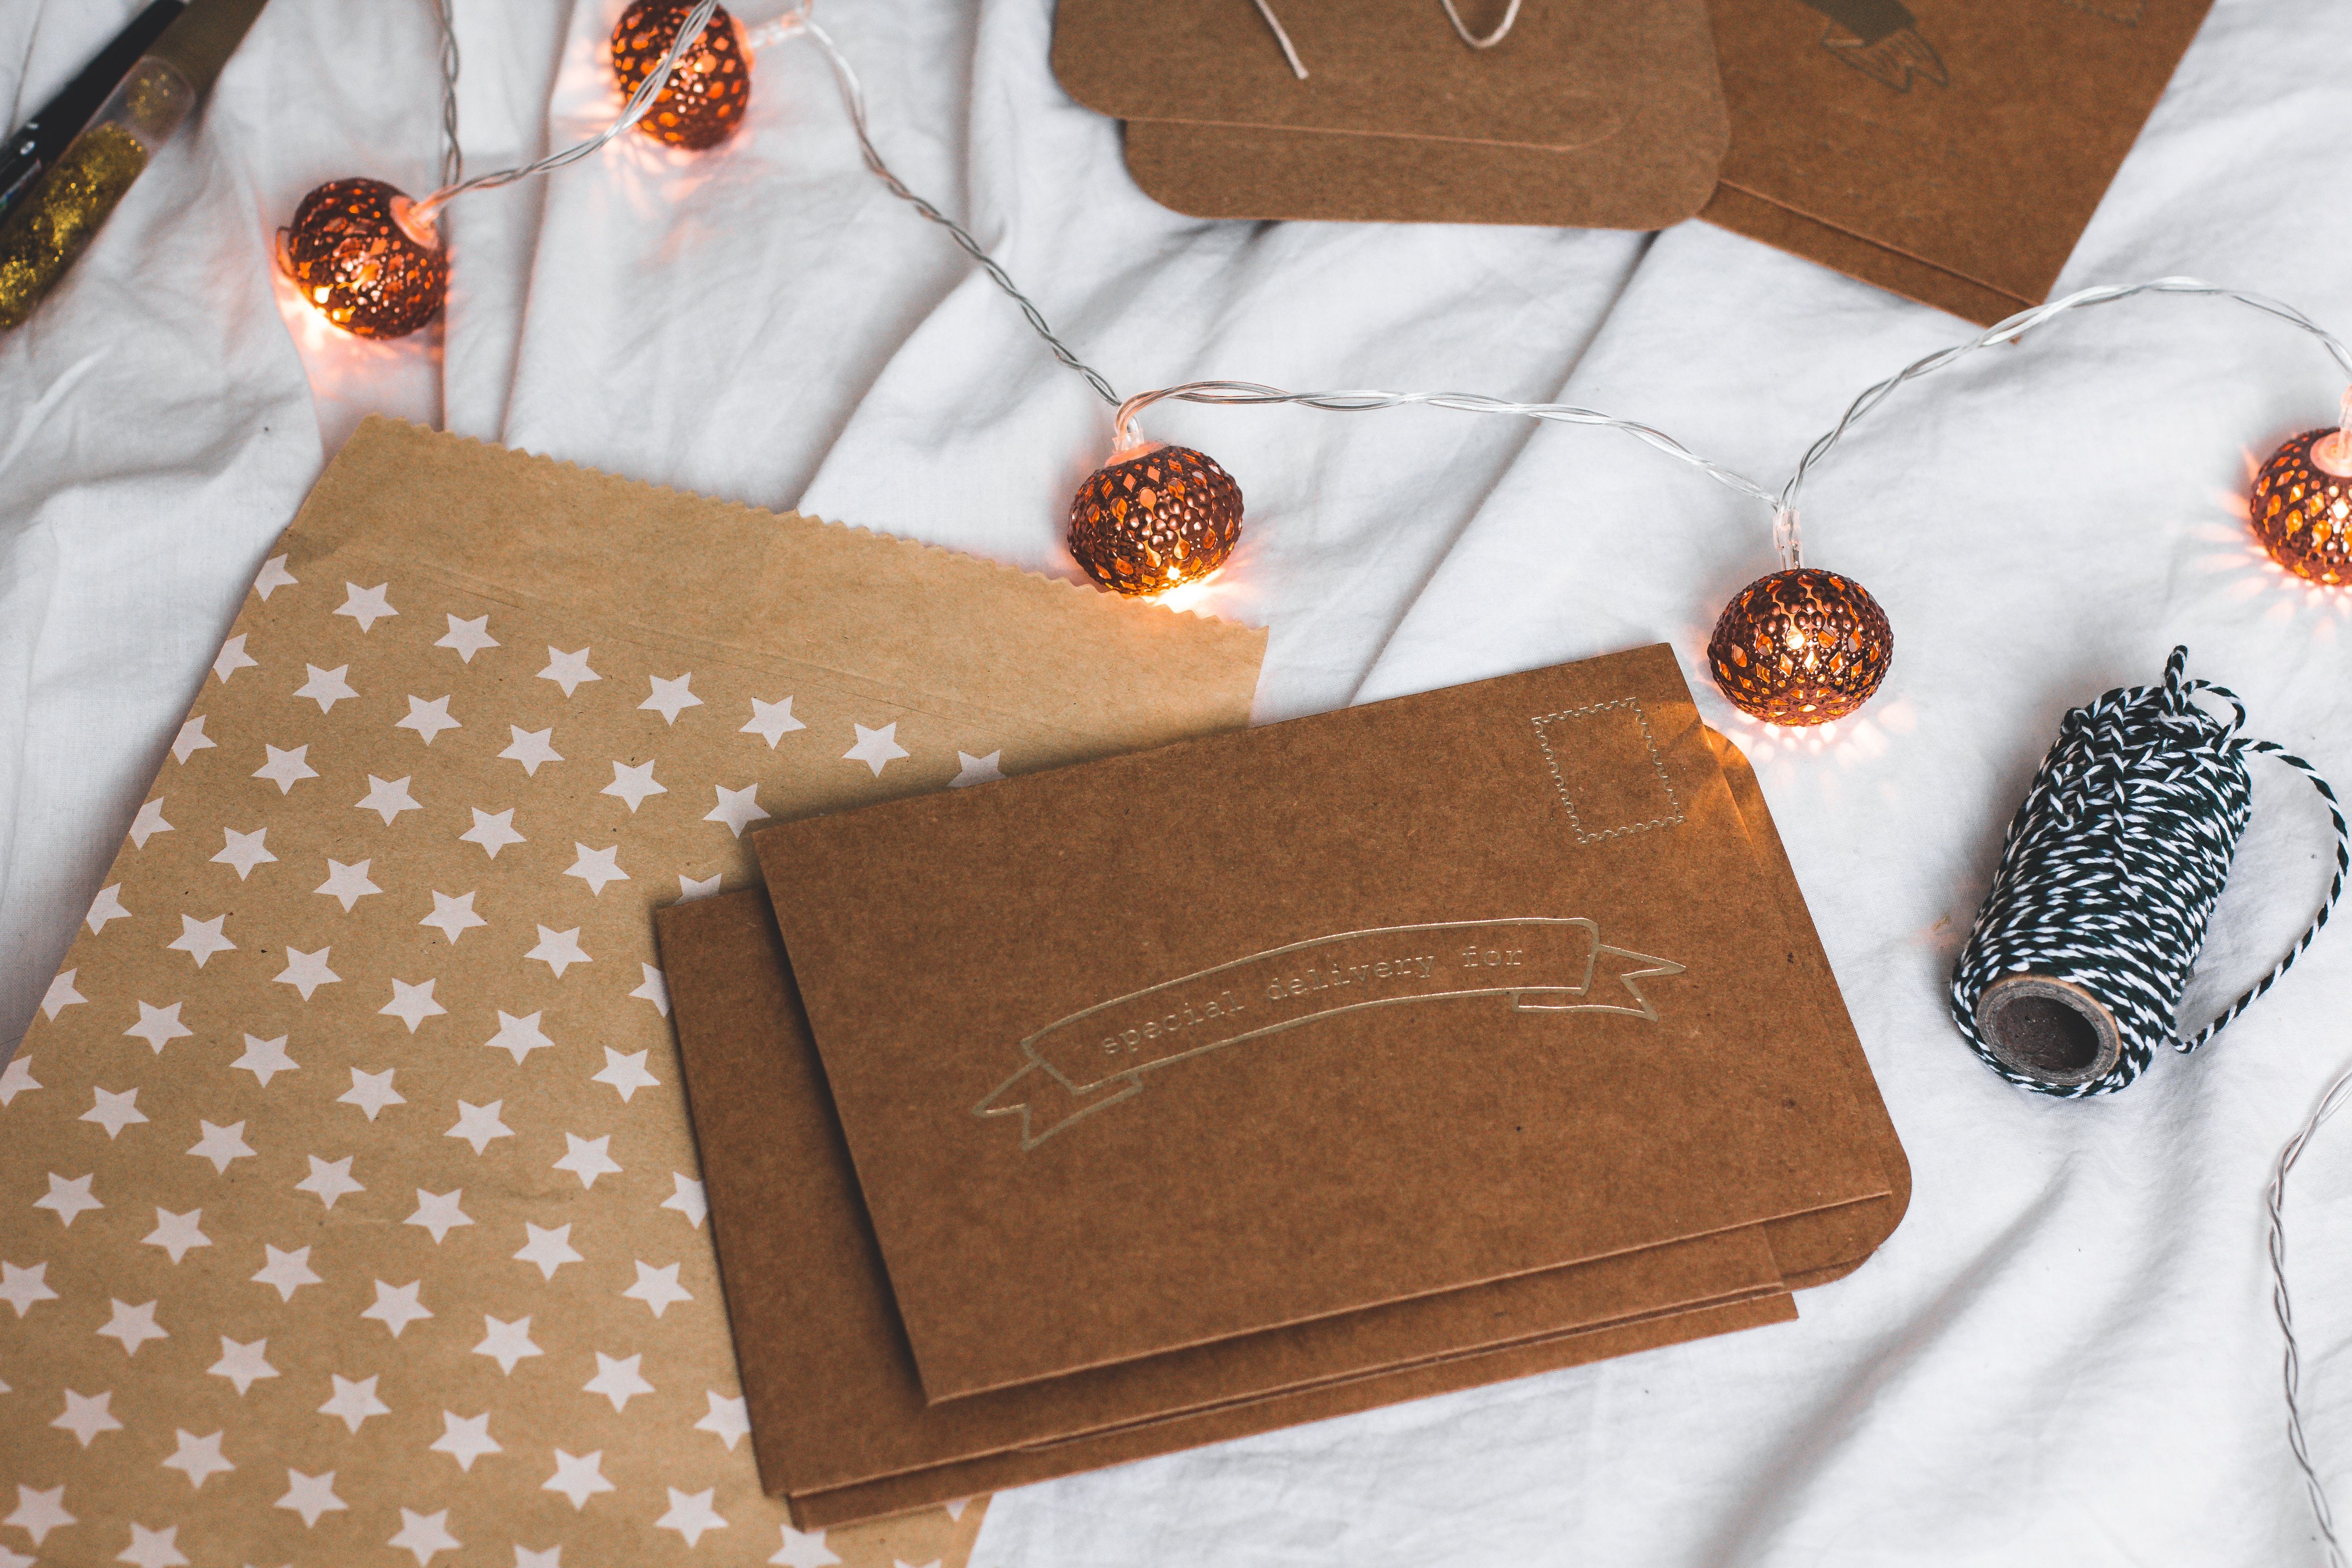 Play Up Your Holiday Photo Album with Gift Wrapping